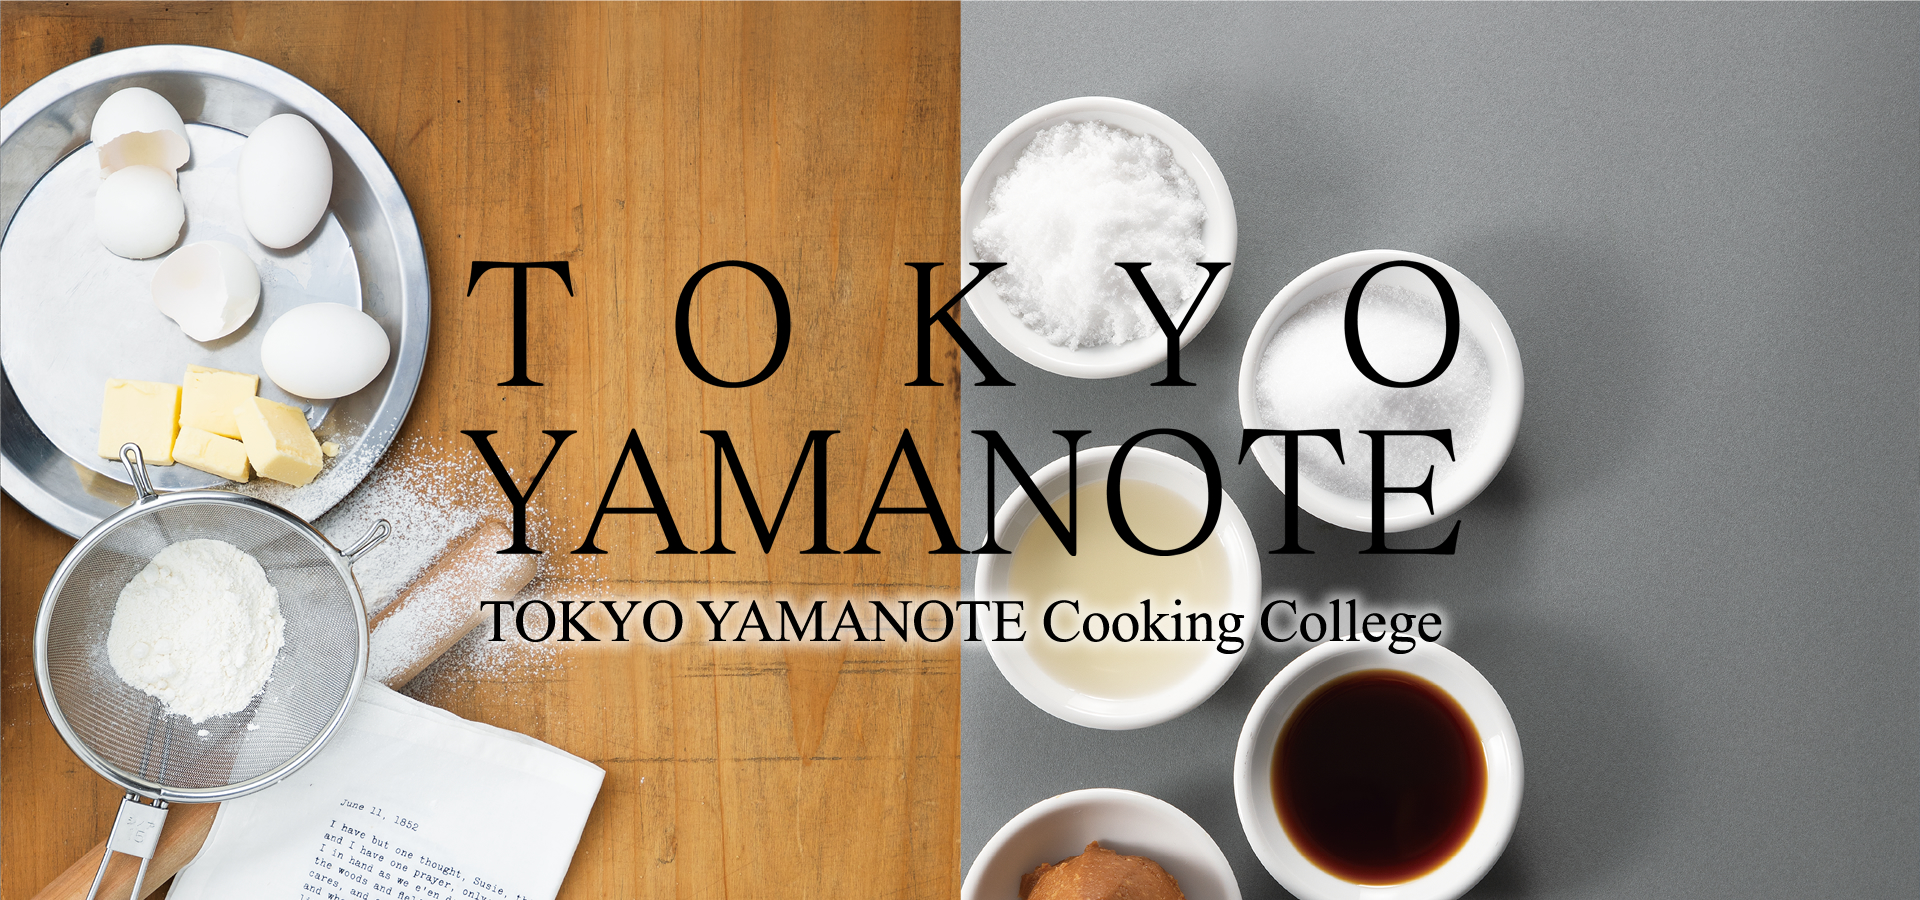 TOKYO YAMANOTE Cooking College